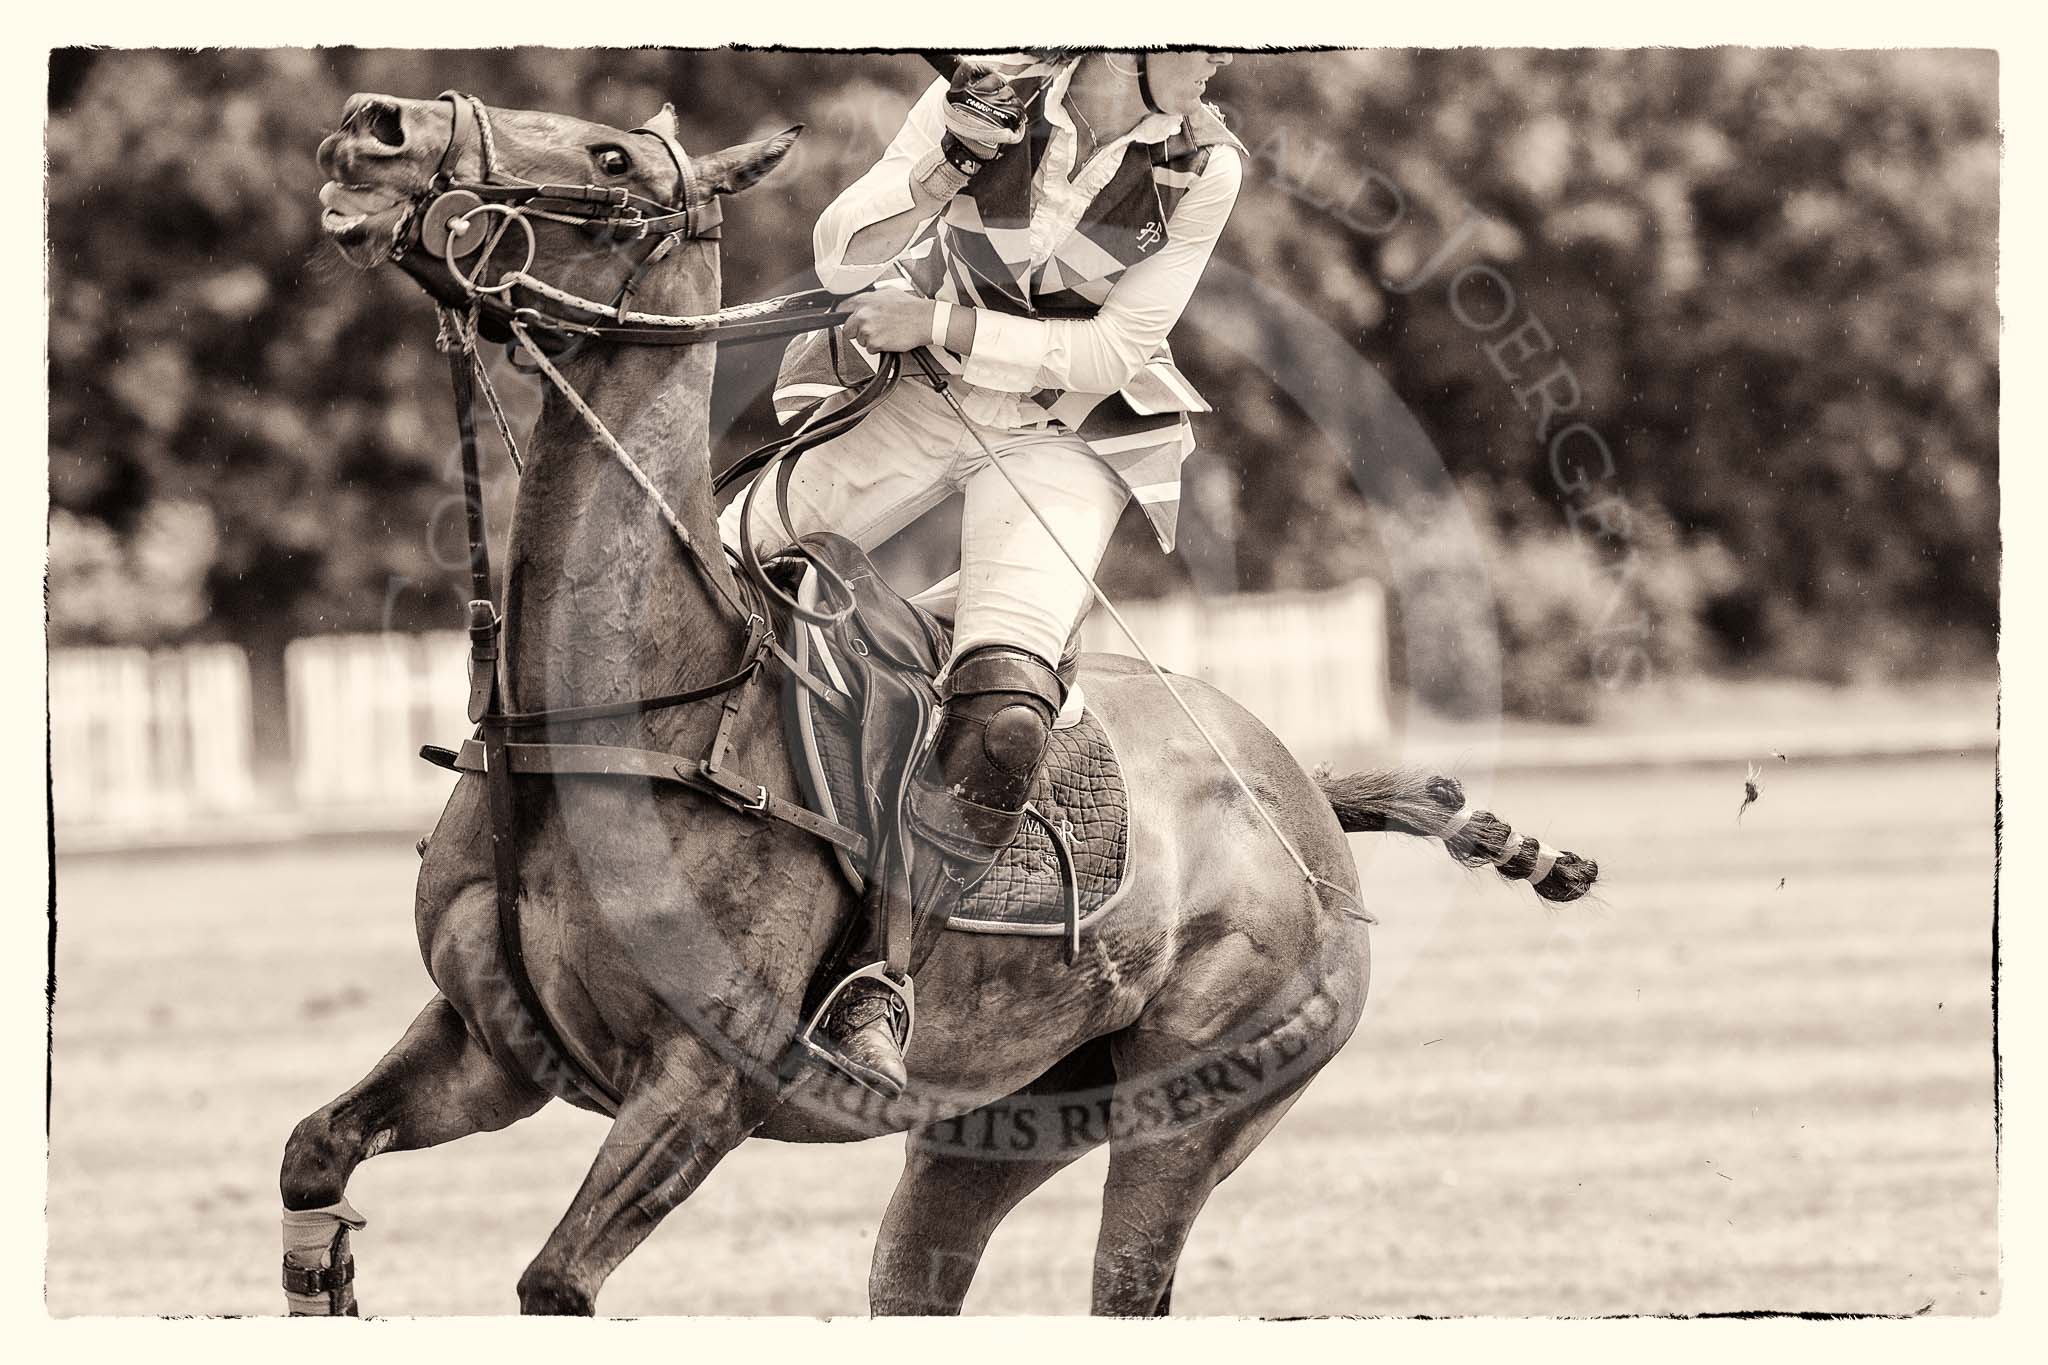 7th Heritage Polo Cup semi-finals: Sarah Wisman looking back at her nearside back shot and pass to her Team mate of..
Hurtwood Park Polo Club,
Ewhurst Green,
Surrey,
United Kingdom,
on 04 August 2012 at 13:35, image #160